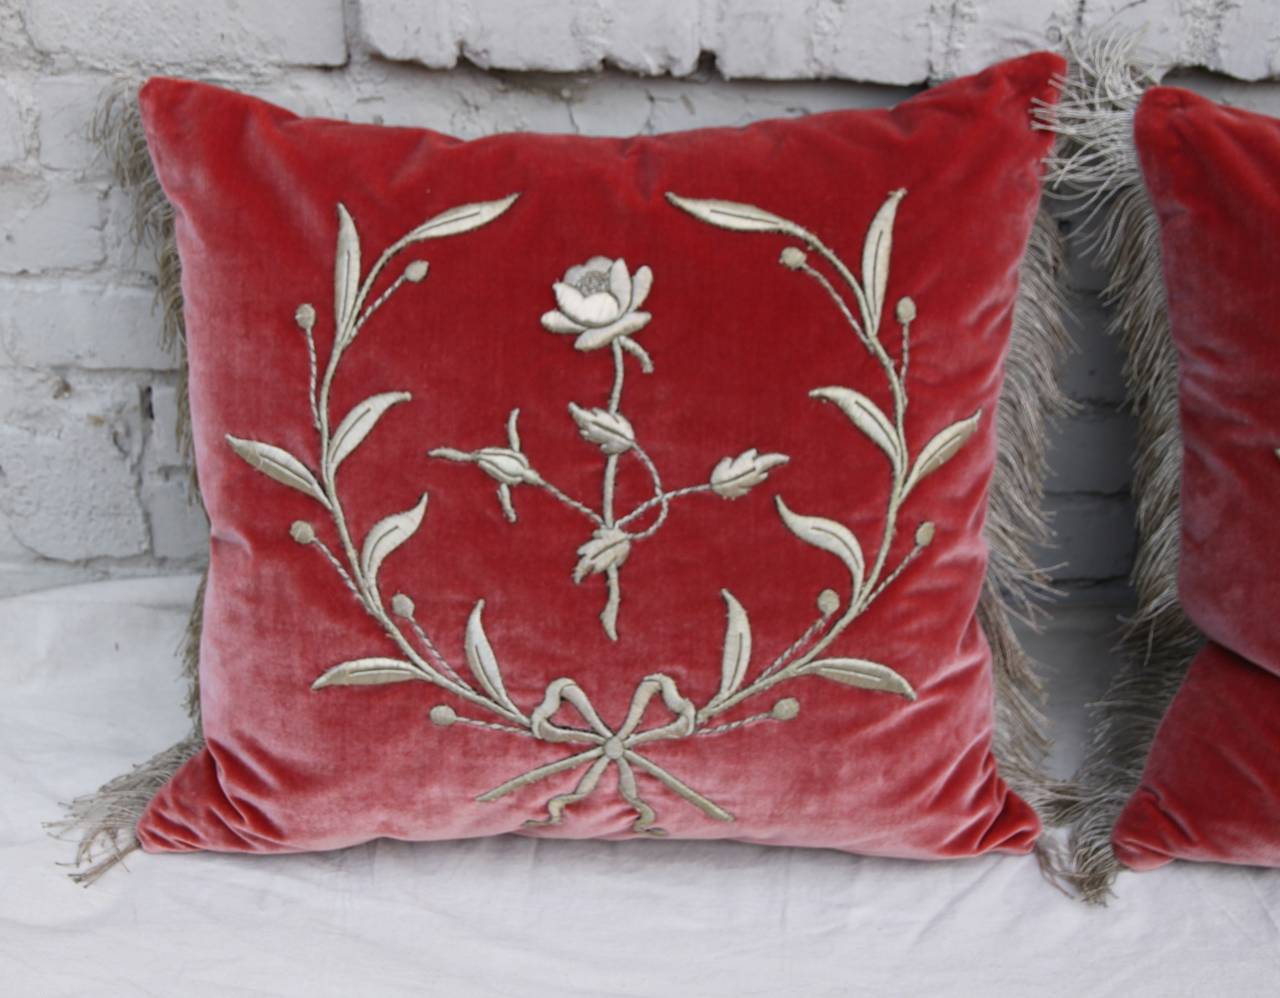 Pair of 19th century silver metallic appliqued sewn on contemporary coral colored silk velvet.